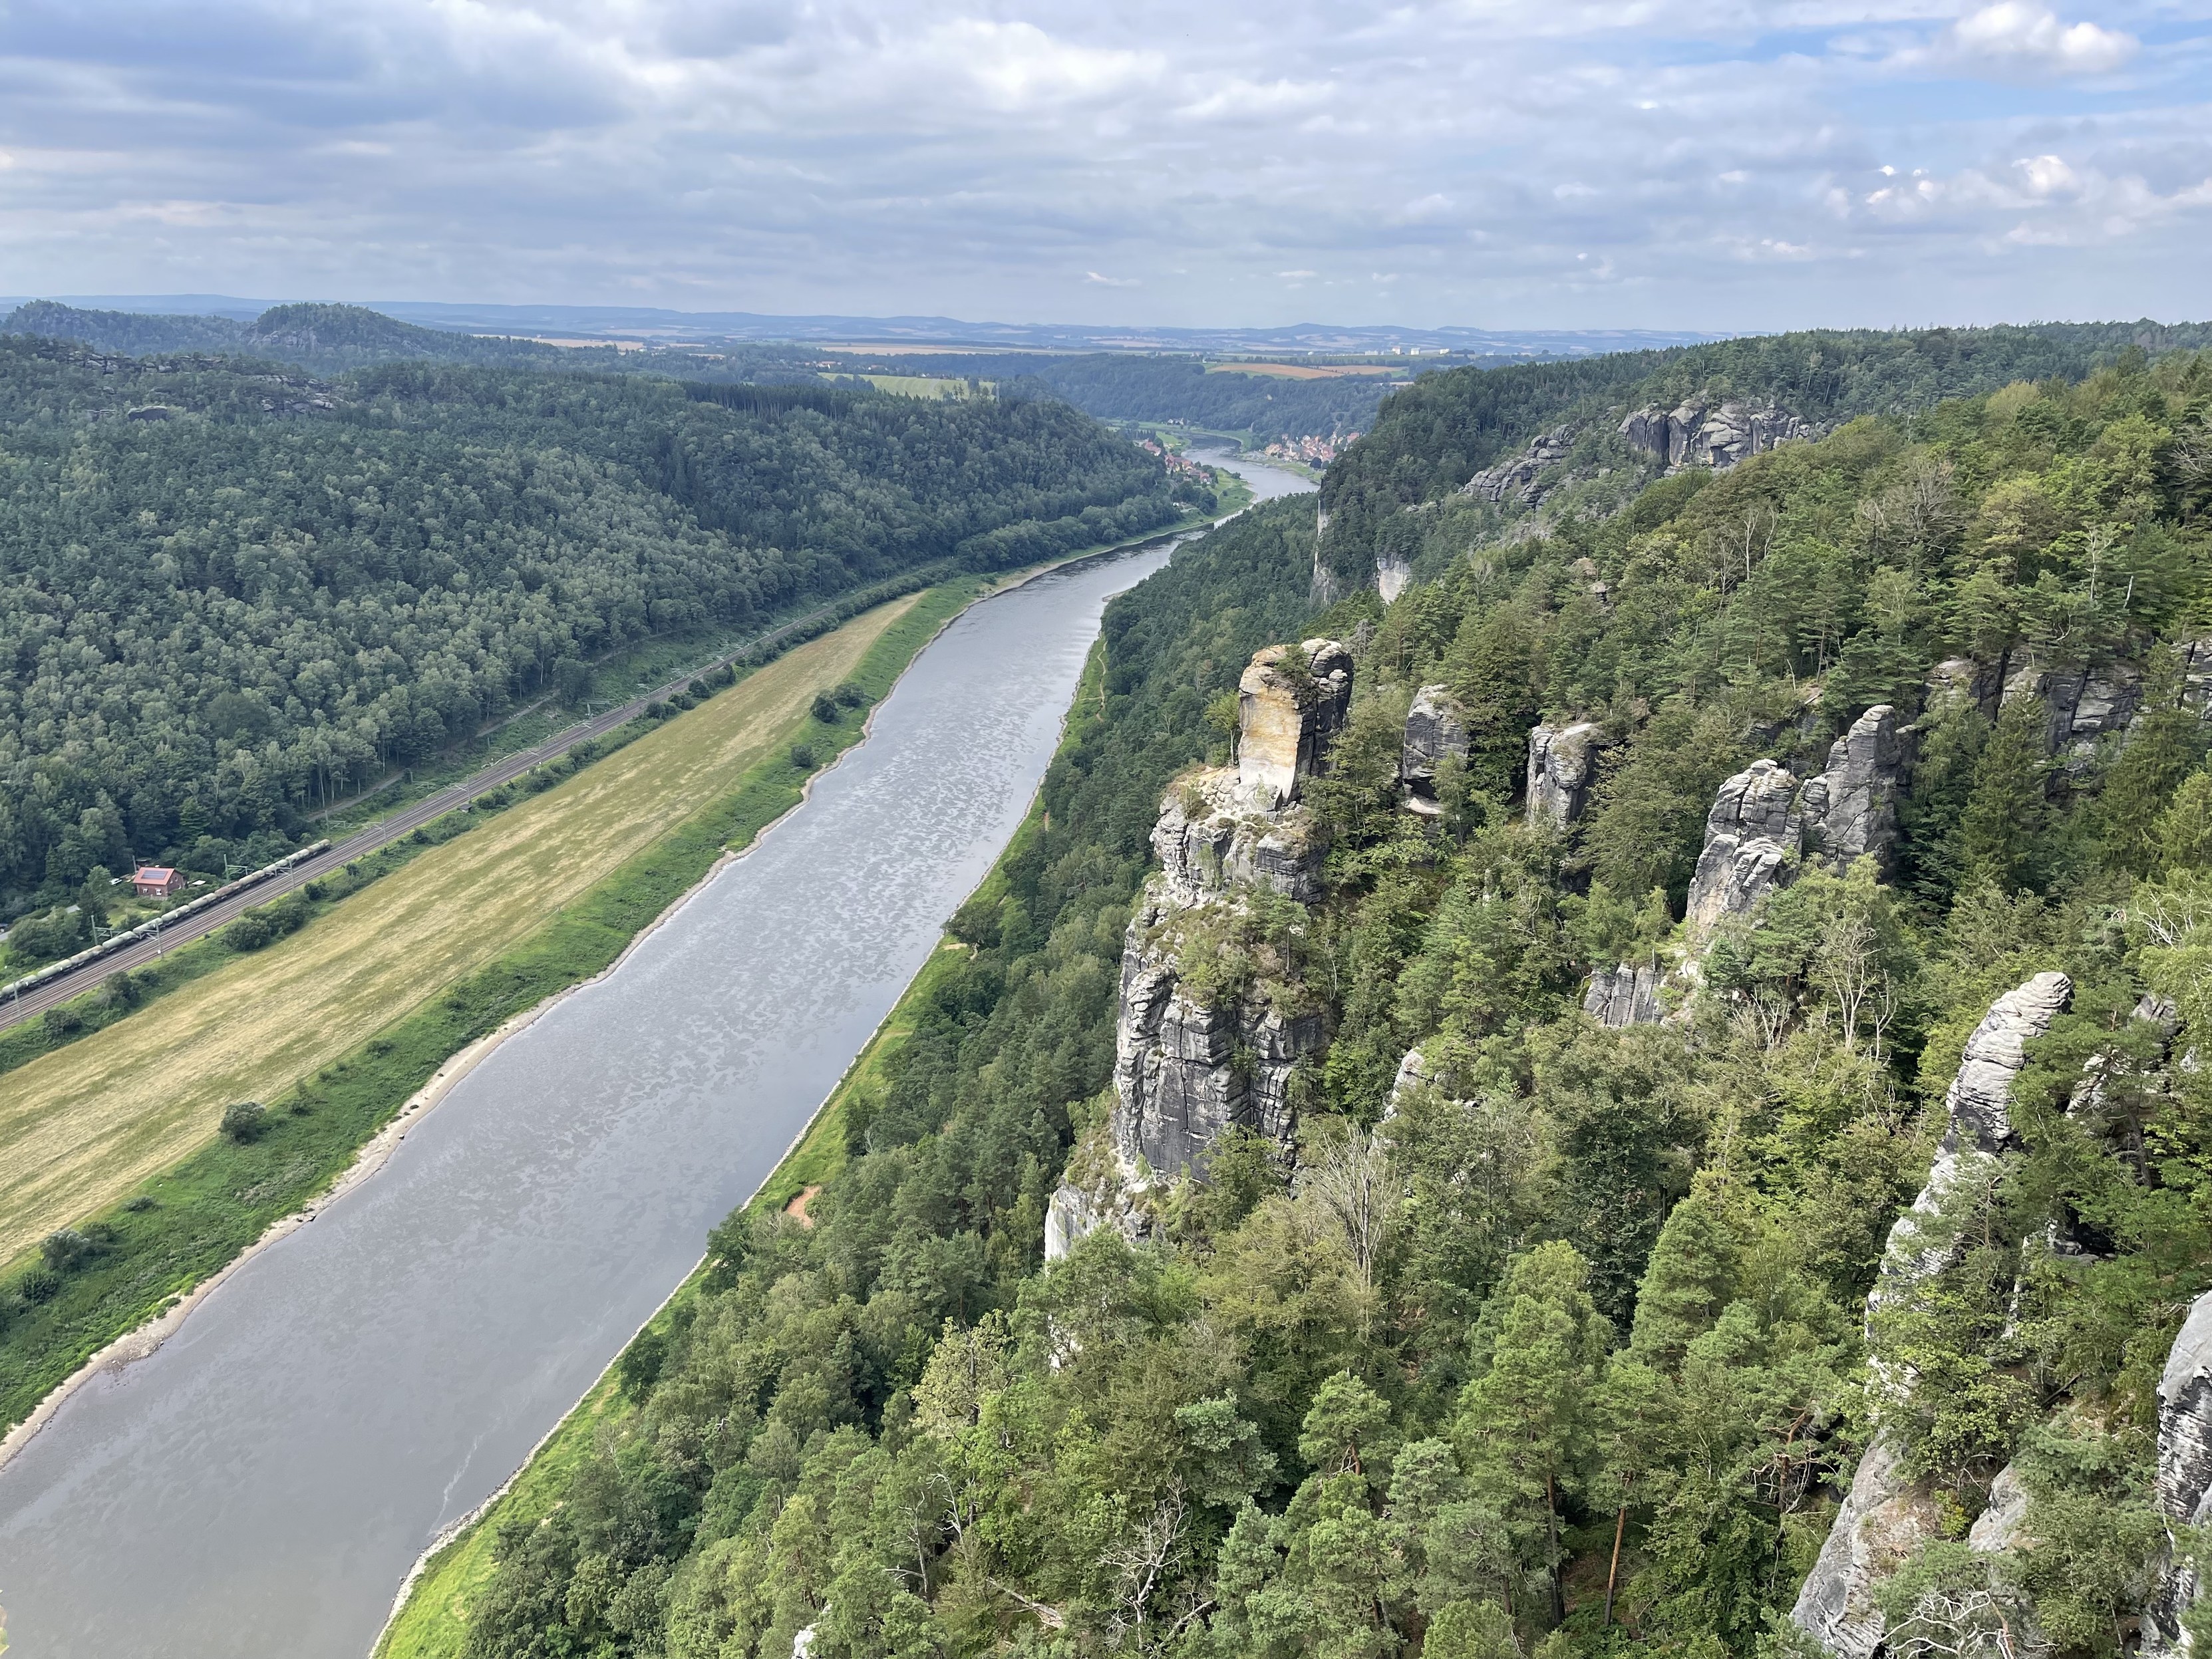 A river winding through a lush forested valley with rocky cliffs on one side under a cloudy sky. The river is the Elbe